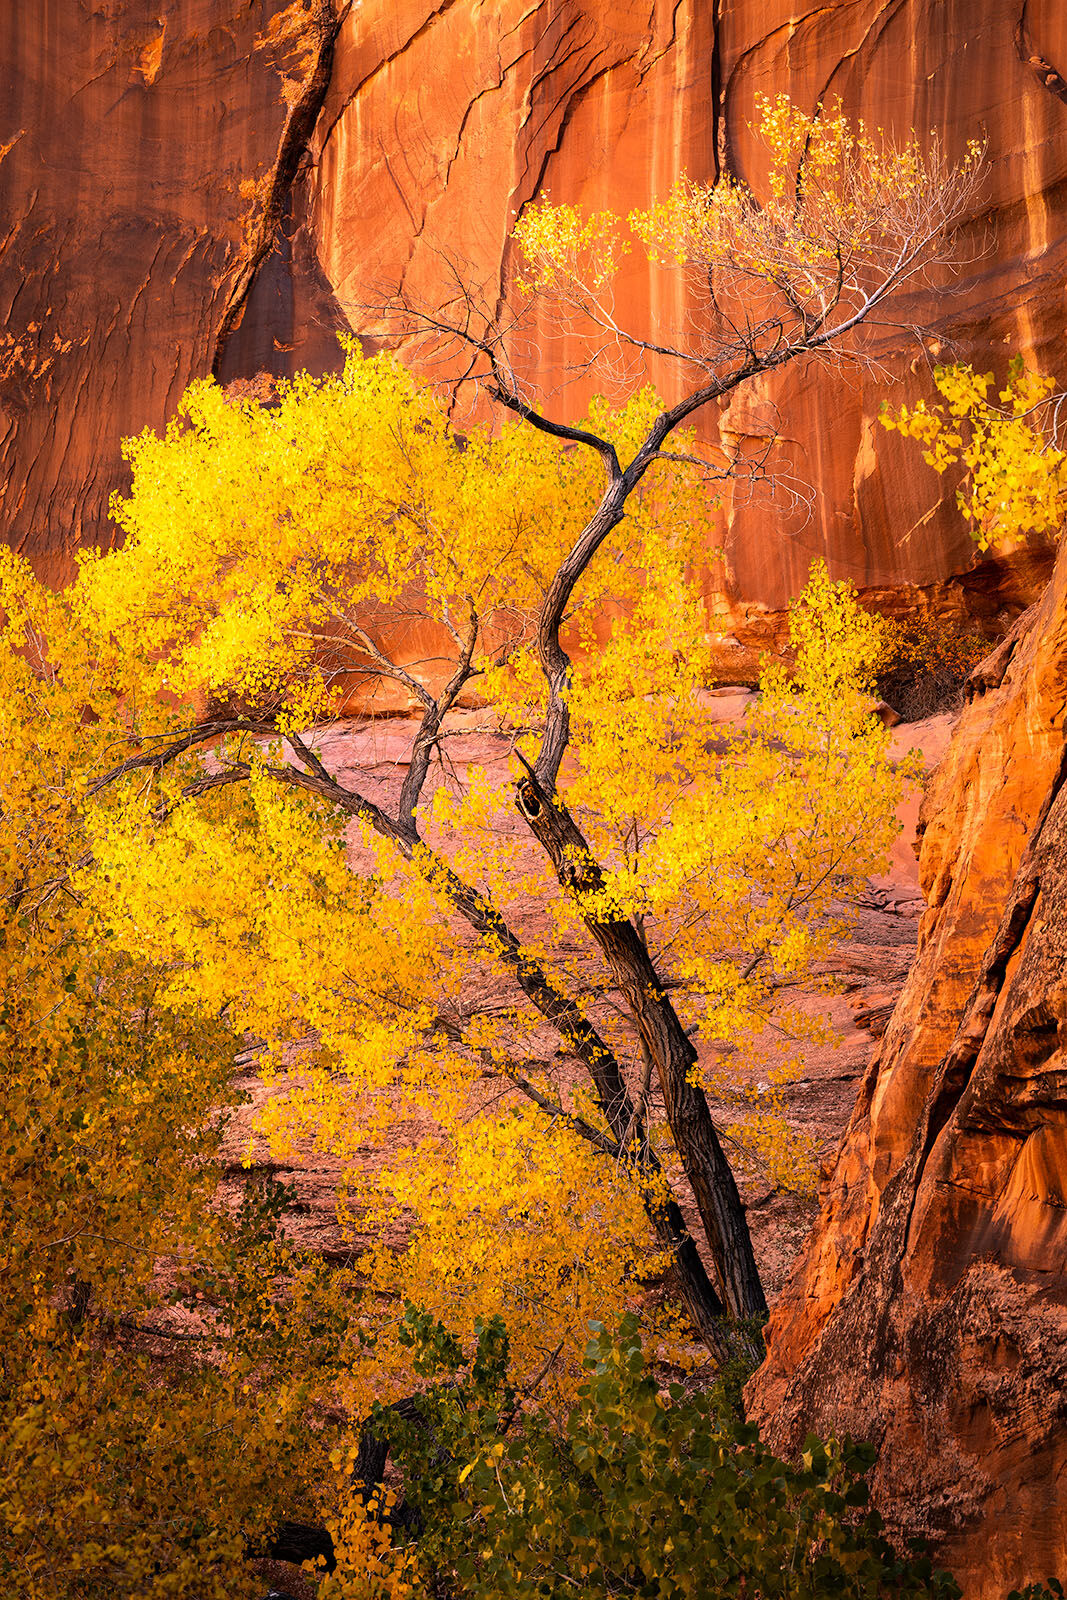 A cottonwood tree with bright yellow leaves is backdrop by a stunning red rock canyon with canyon varnish in hurricane wash in escalante, utah